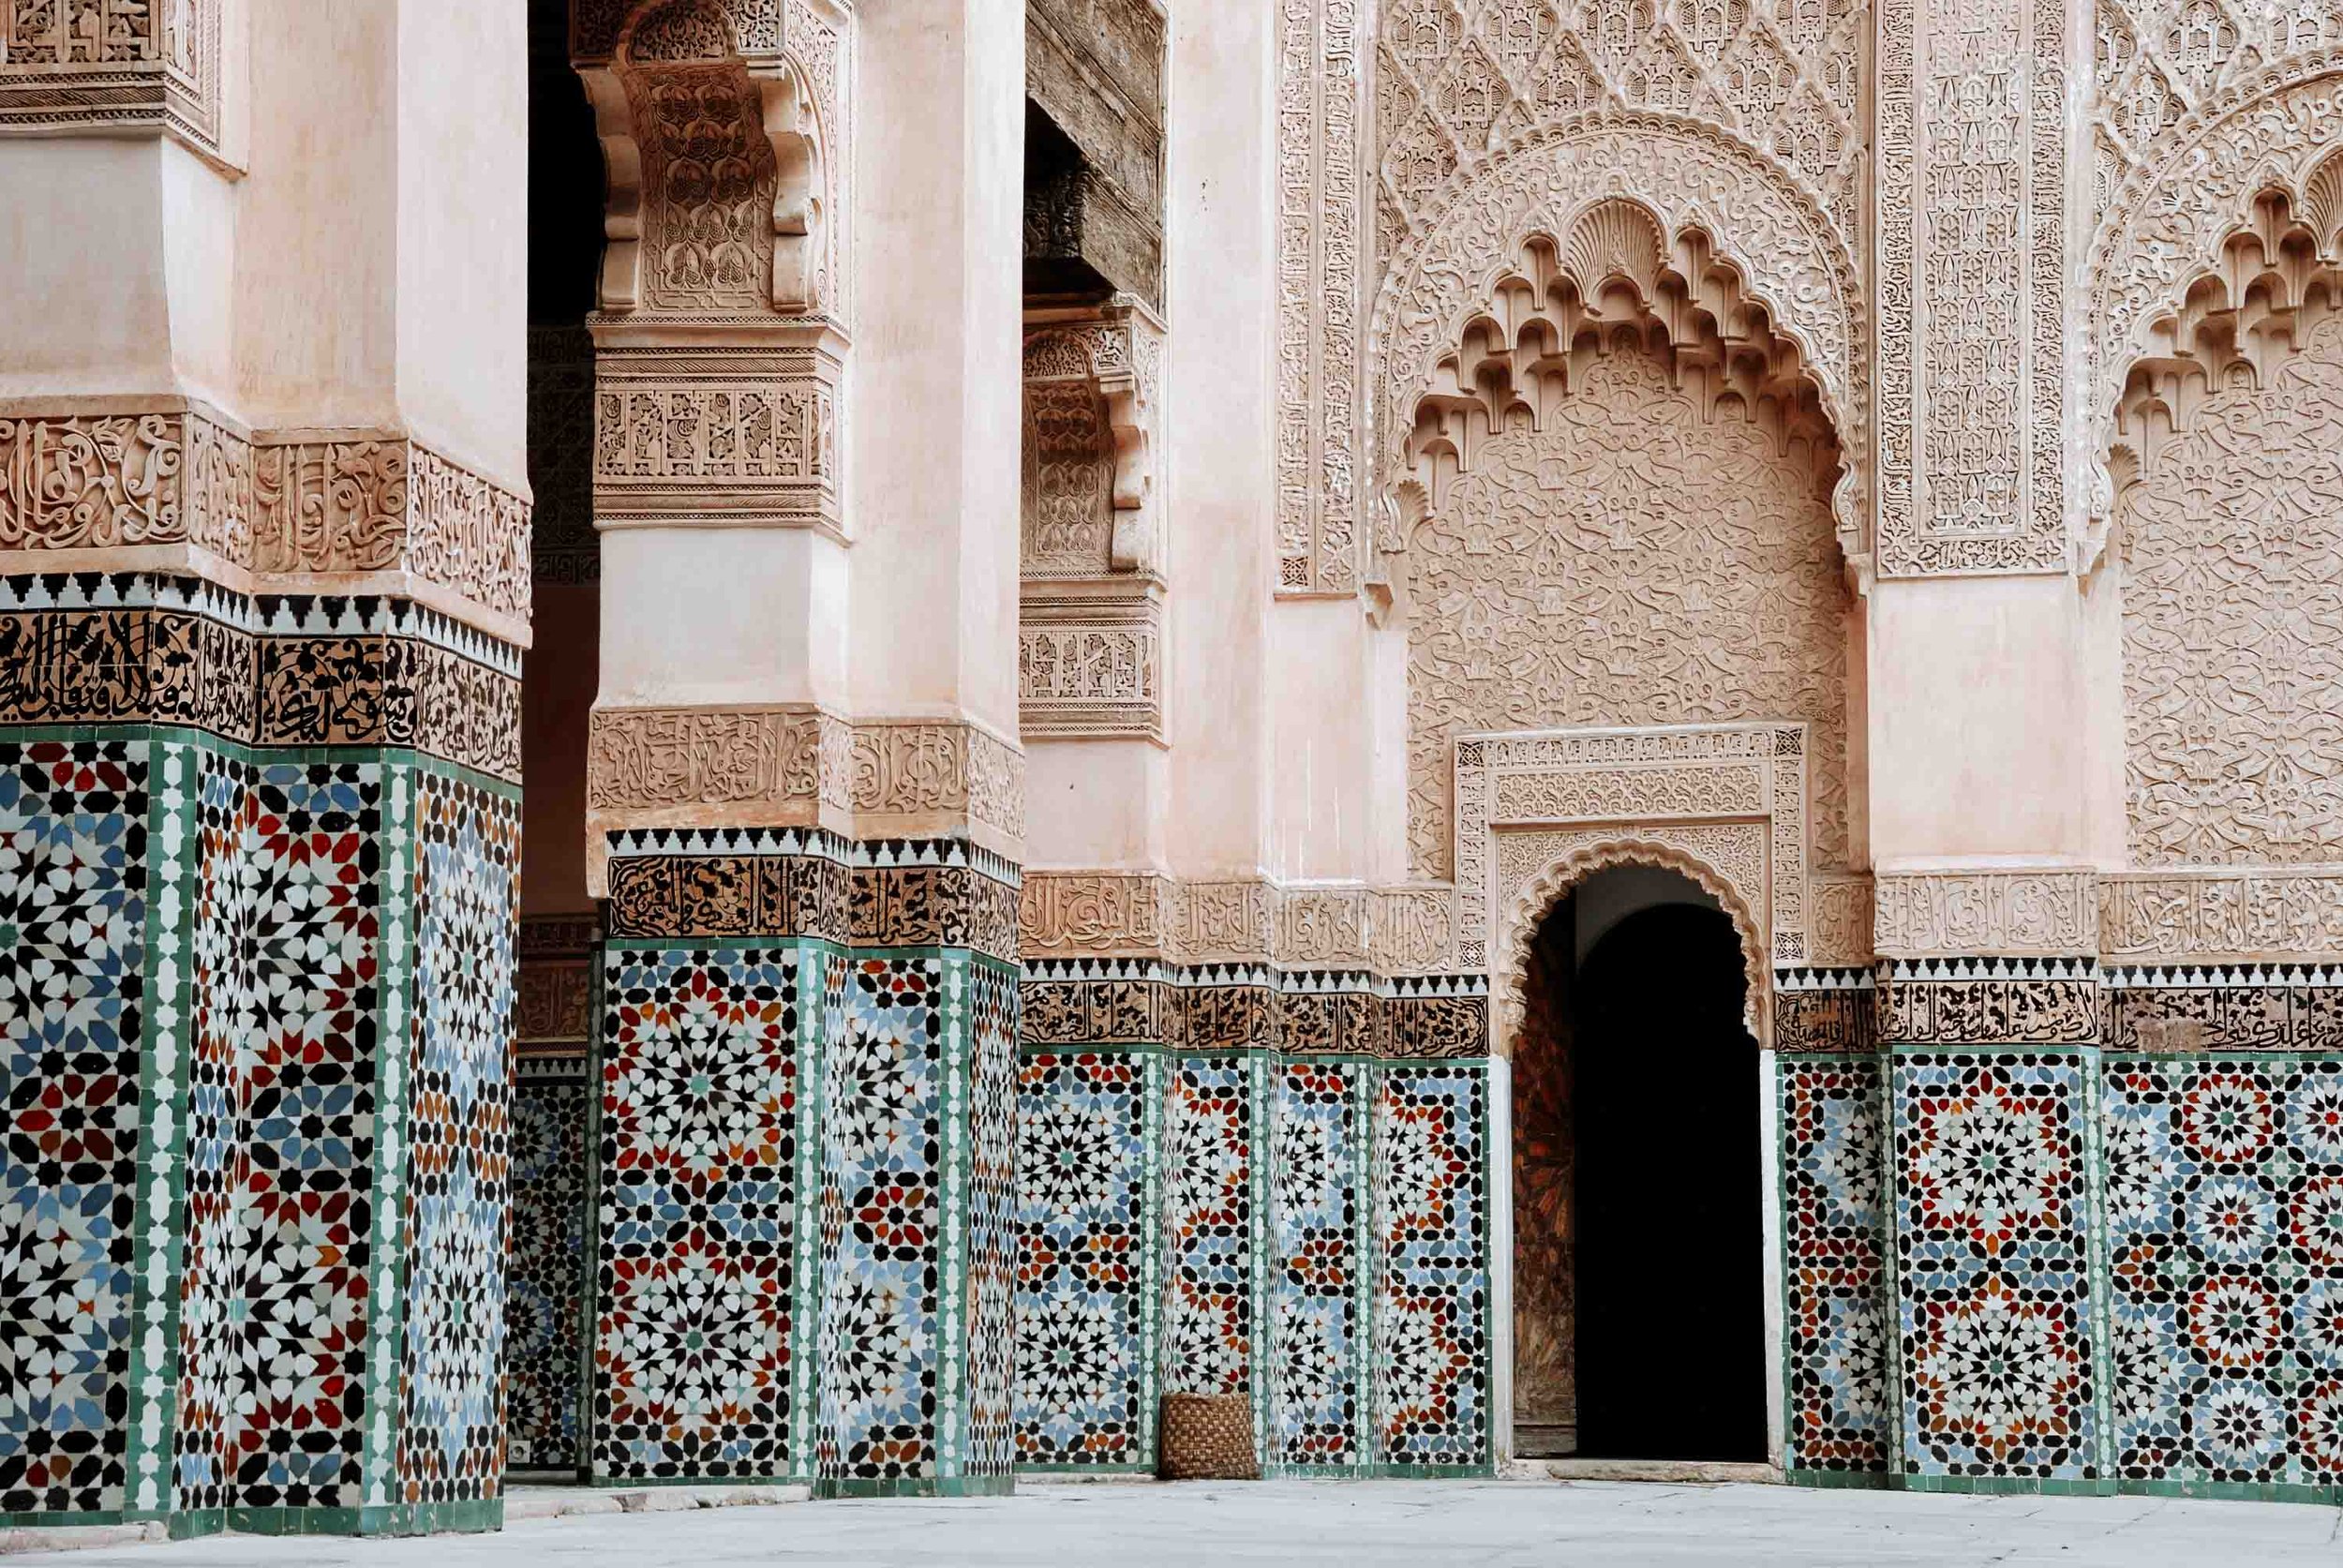 Ben Youssef Madrasa on 3 days in Marrakech itinerary